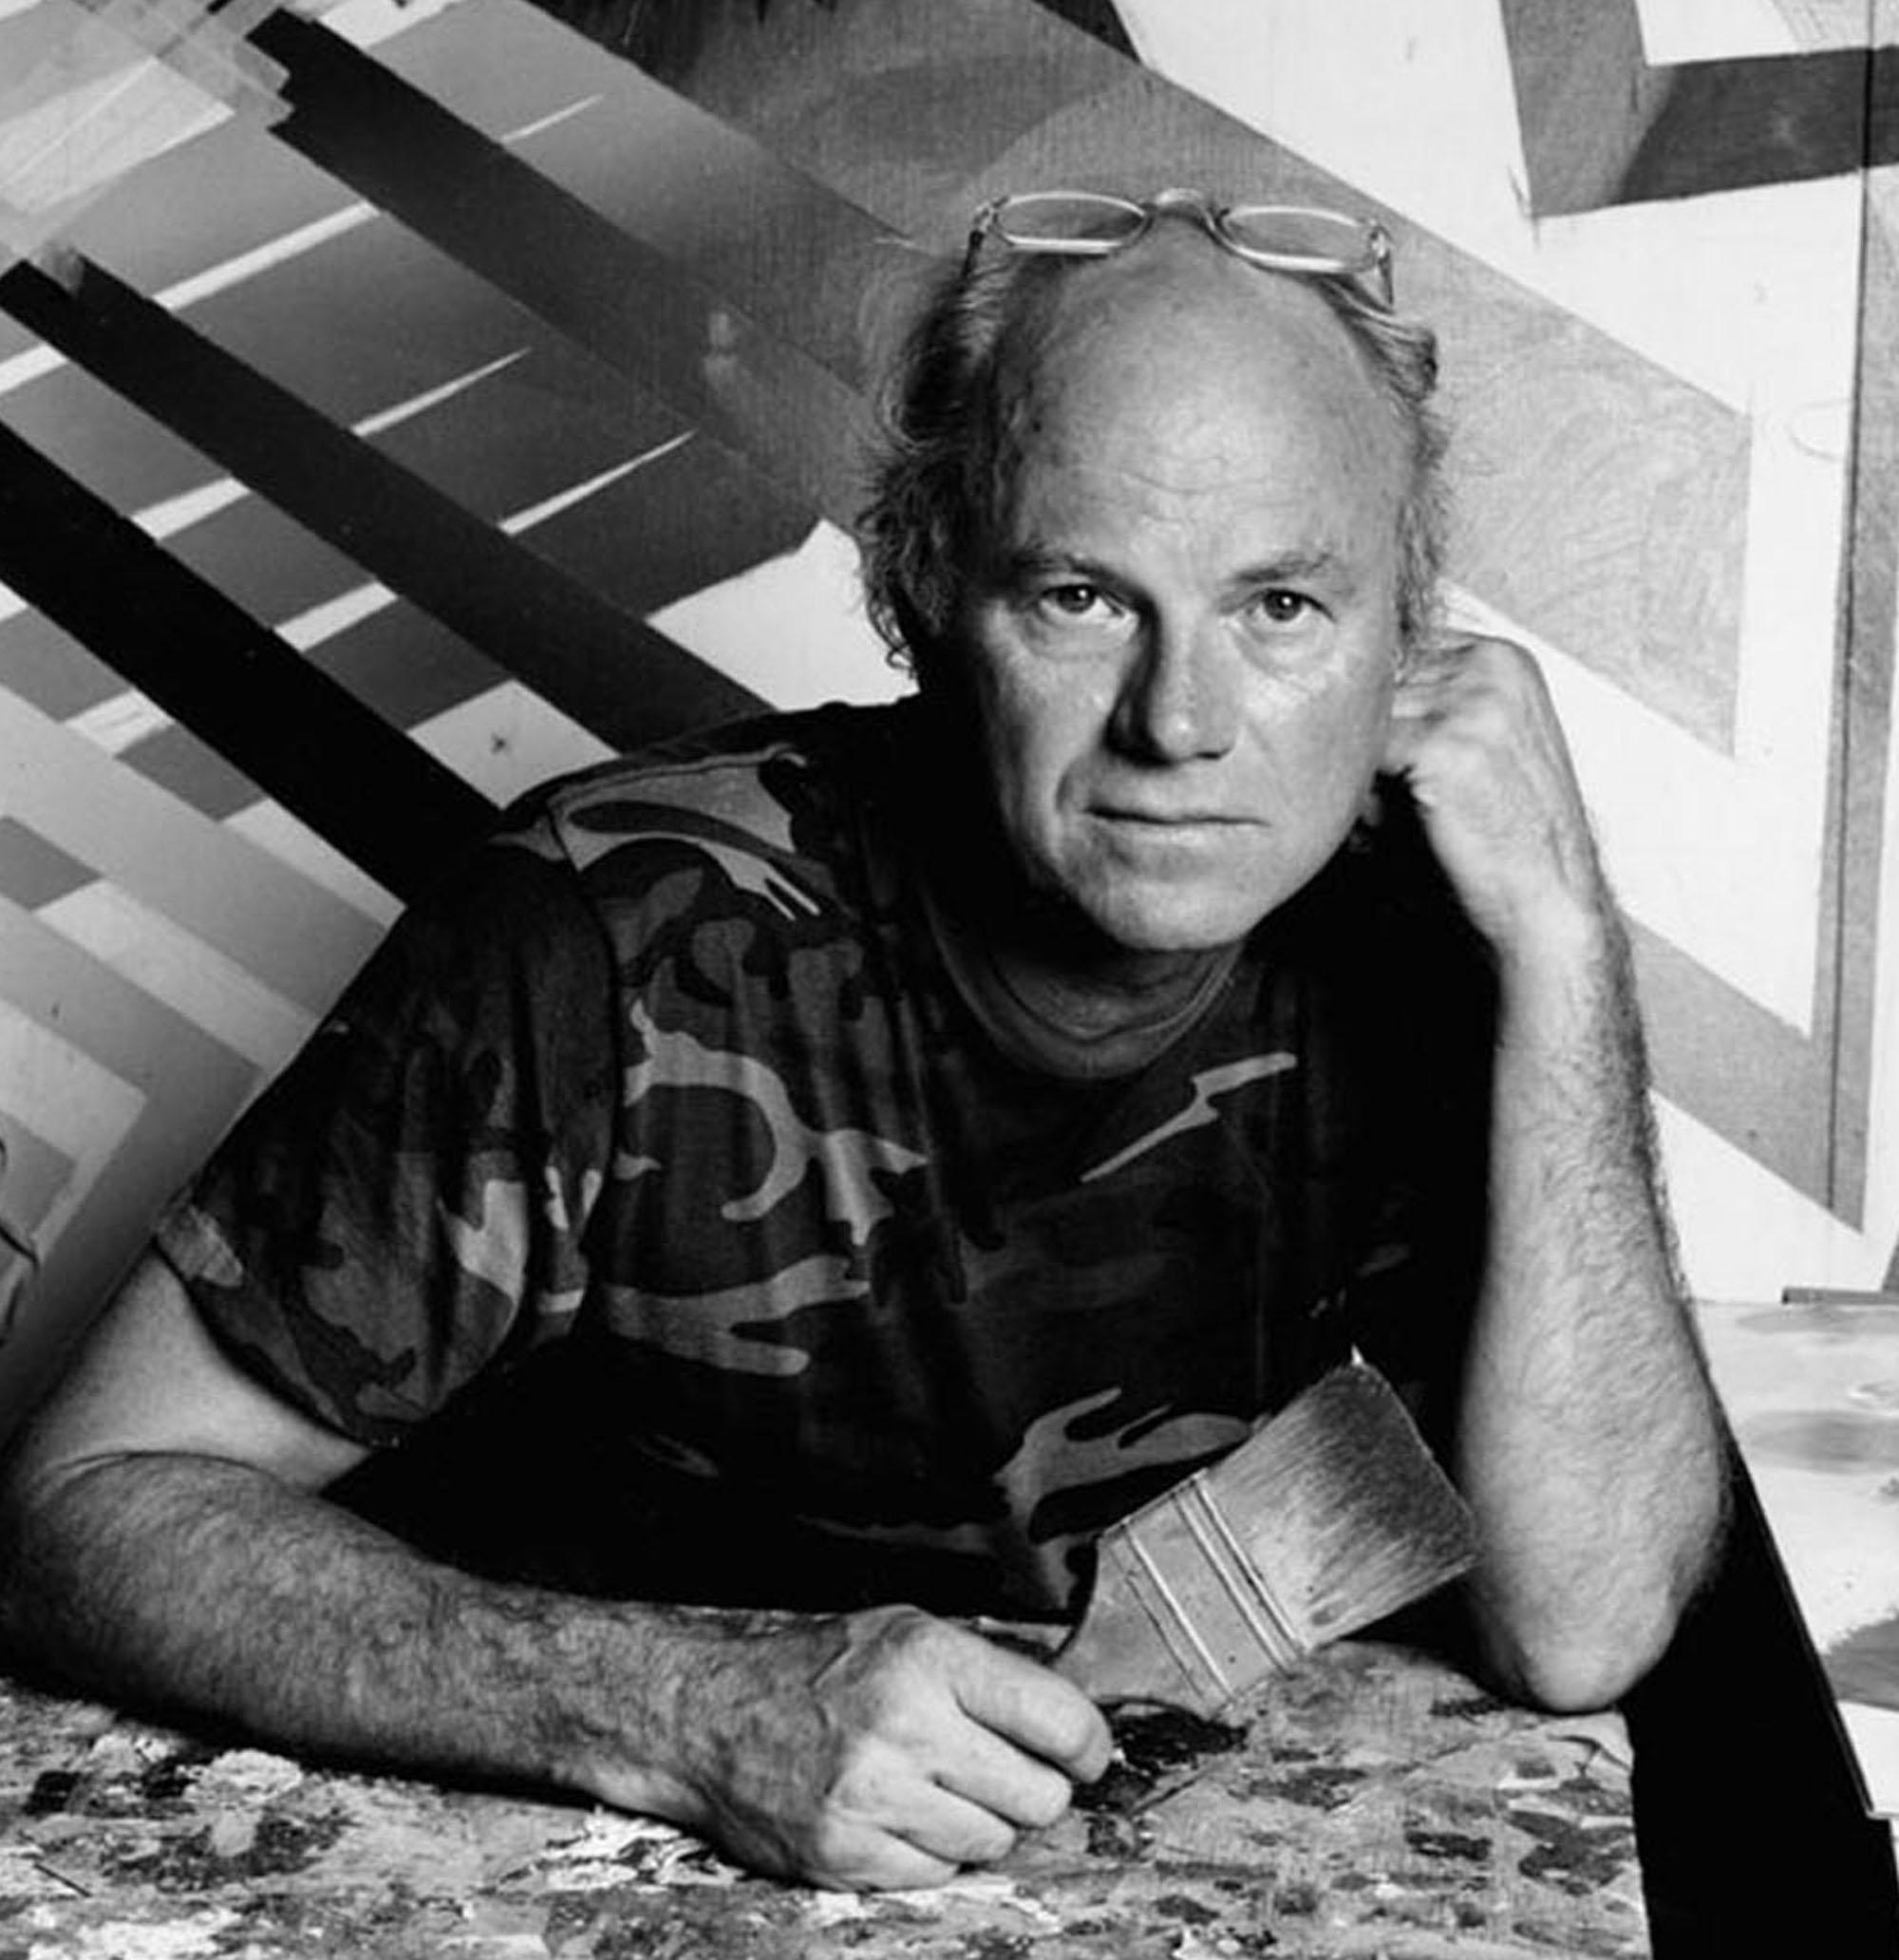 Artist James Rosenquist in his studio - Photograph by Jack Mitchell